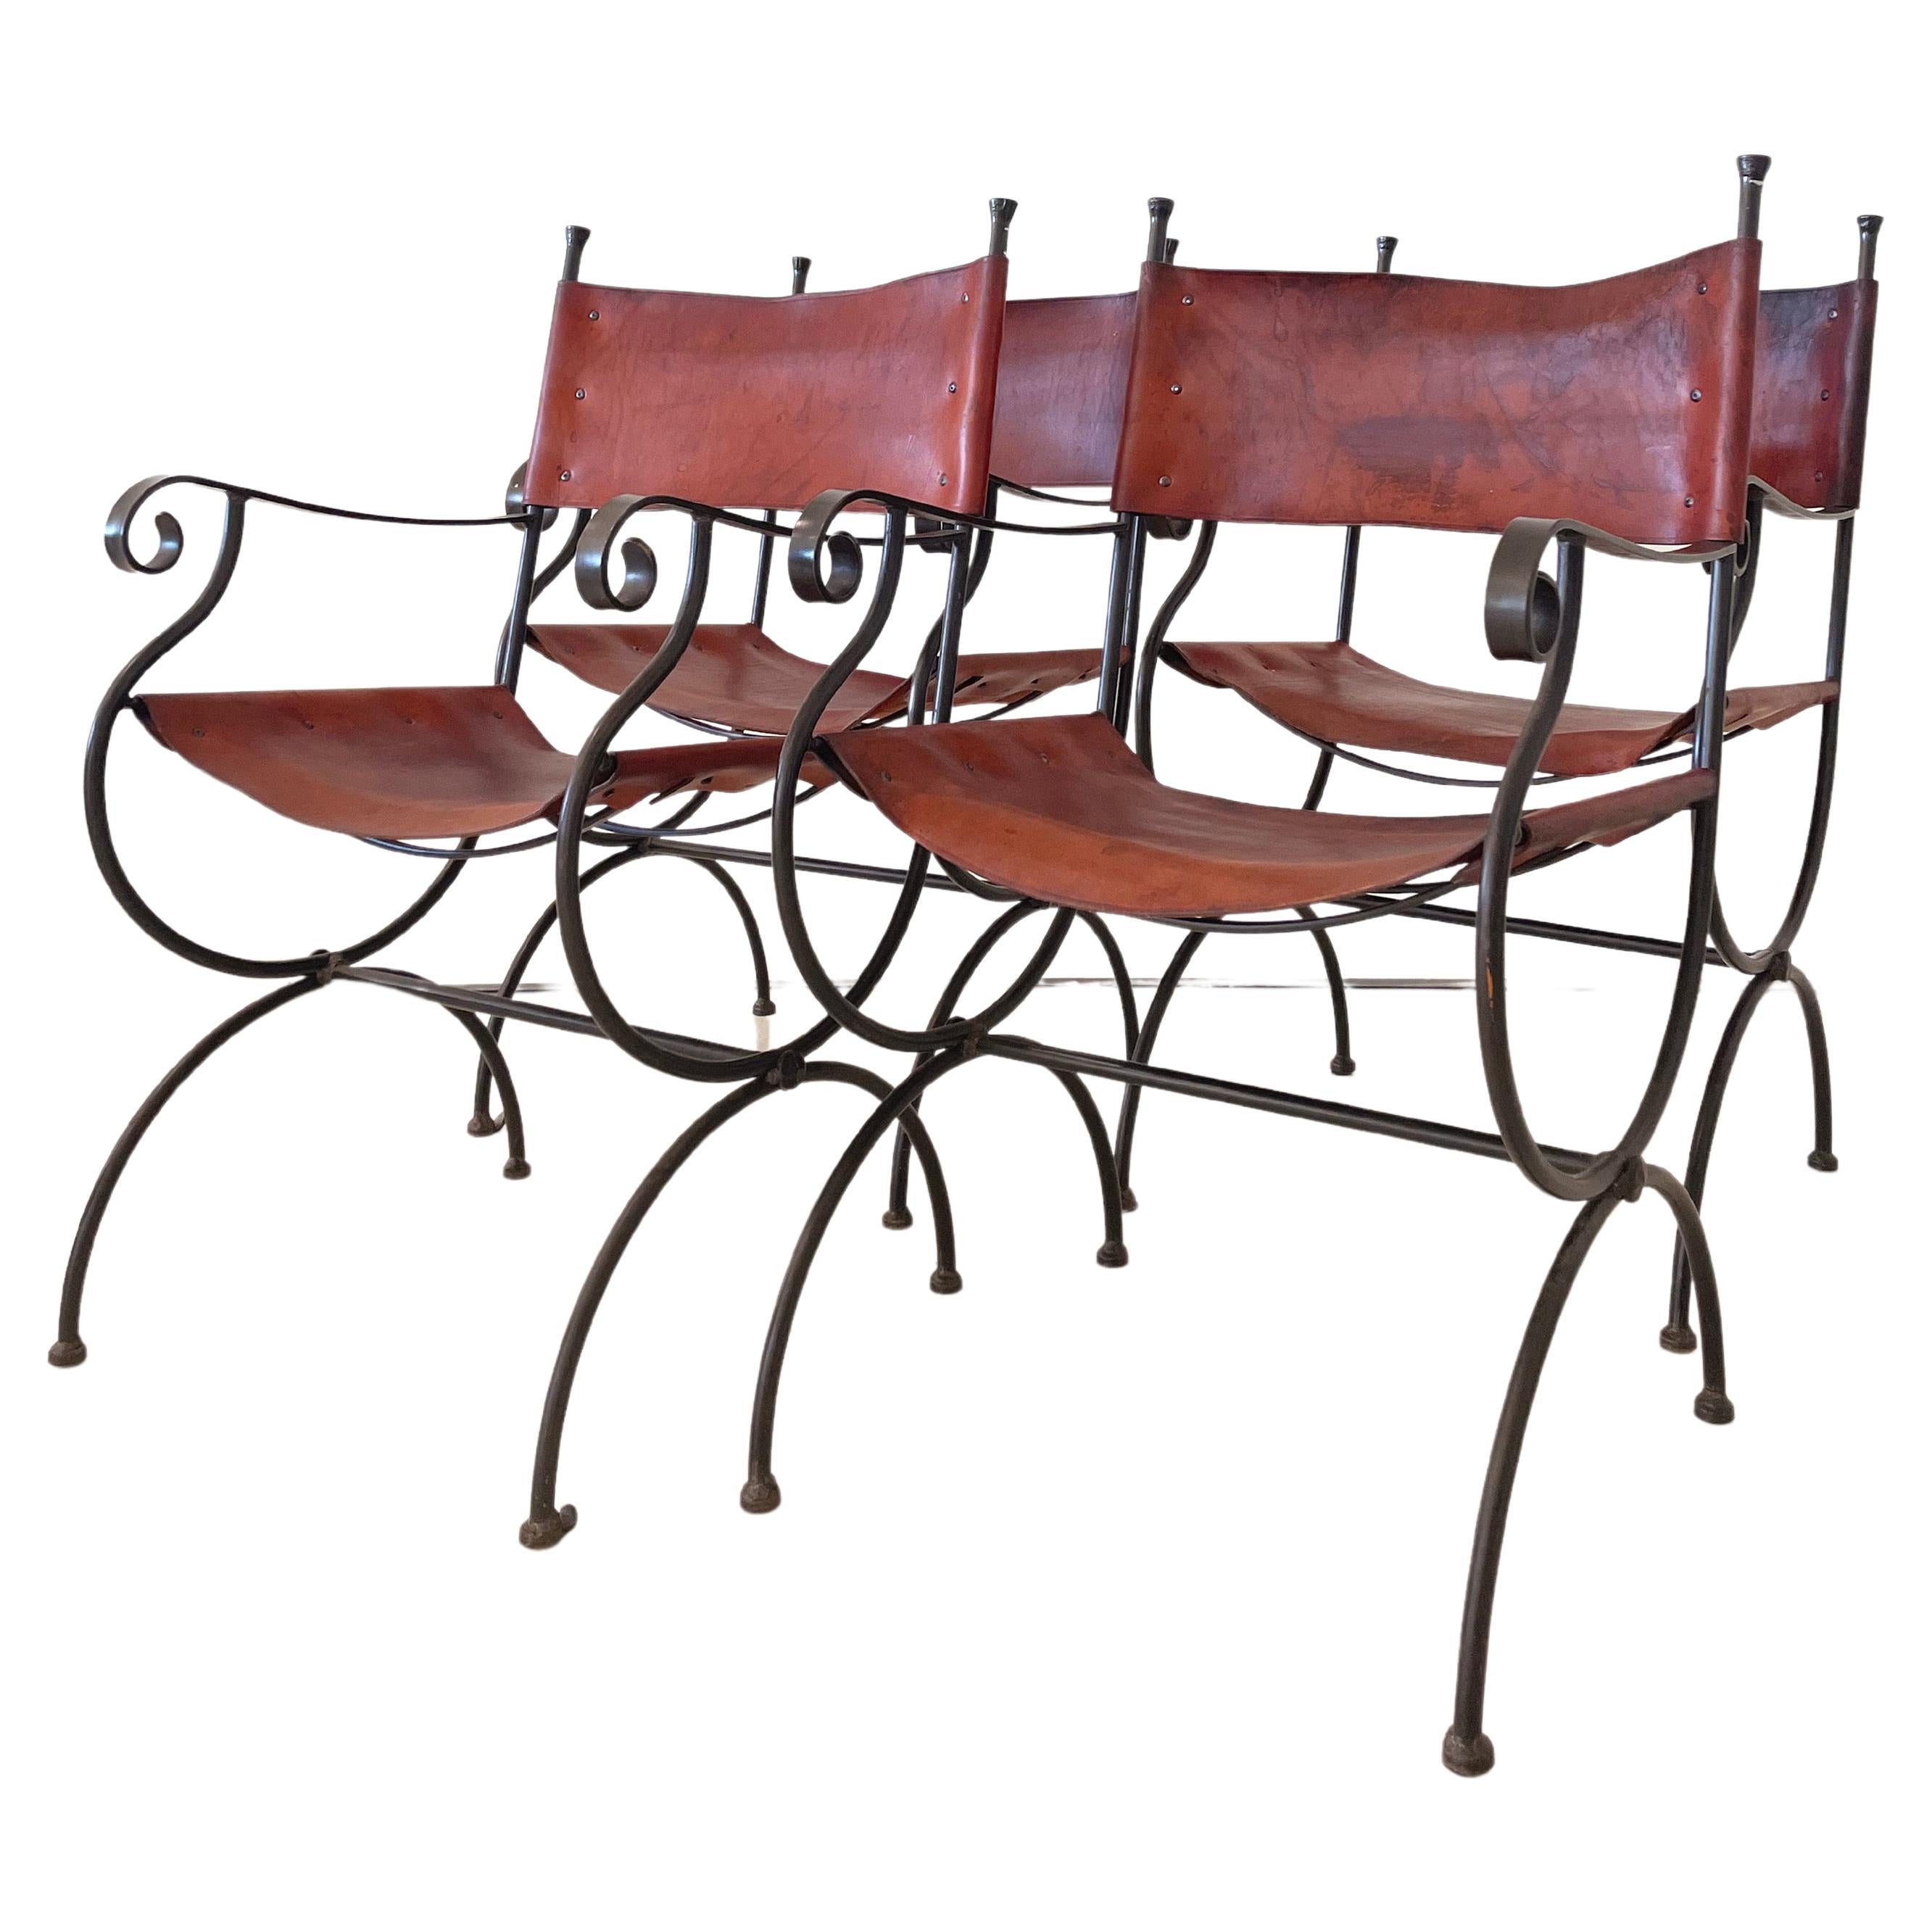 Vintage Legacy Iron & Leather Dining Chairs by Charleston Forge, Set of 4 For Sale